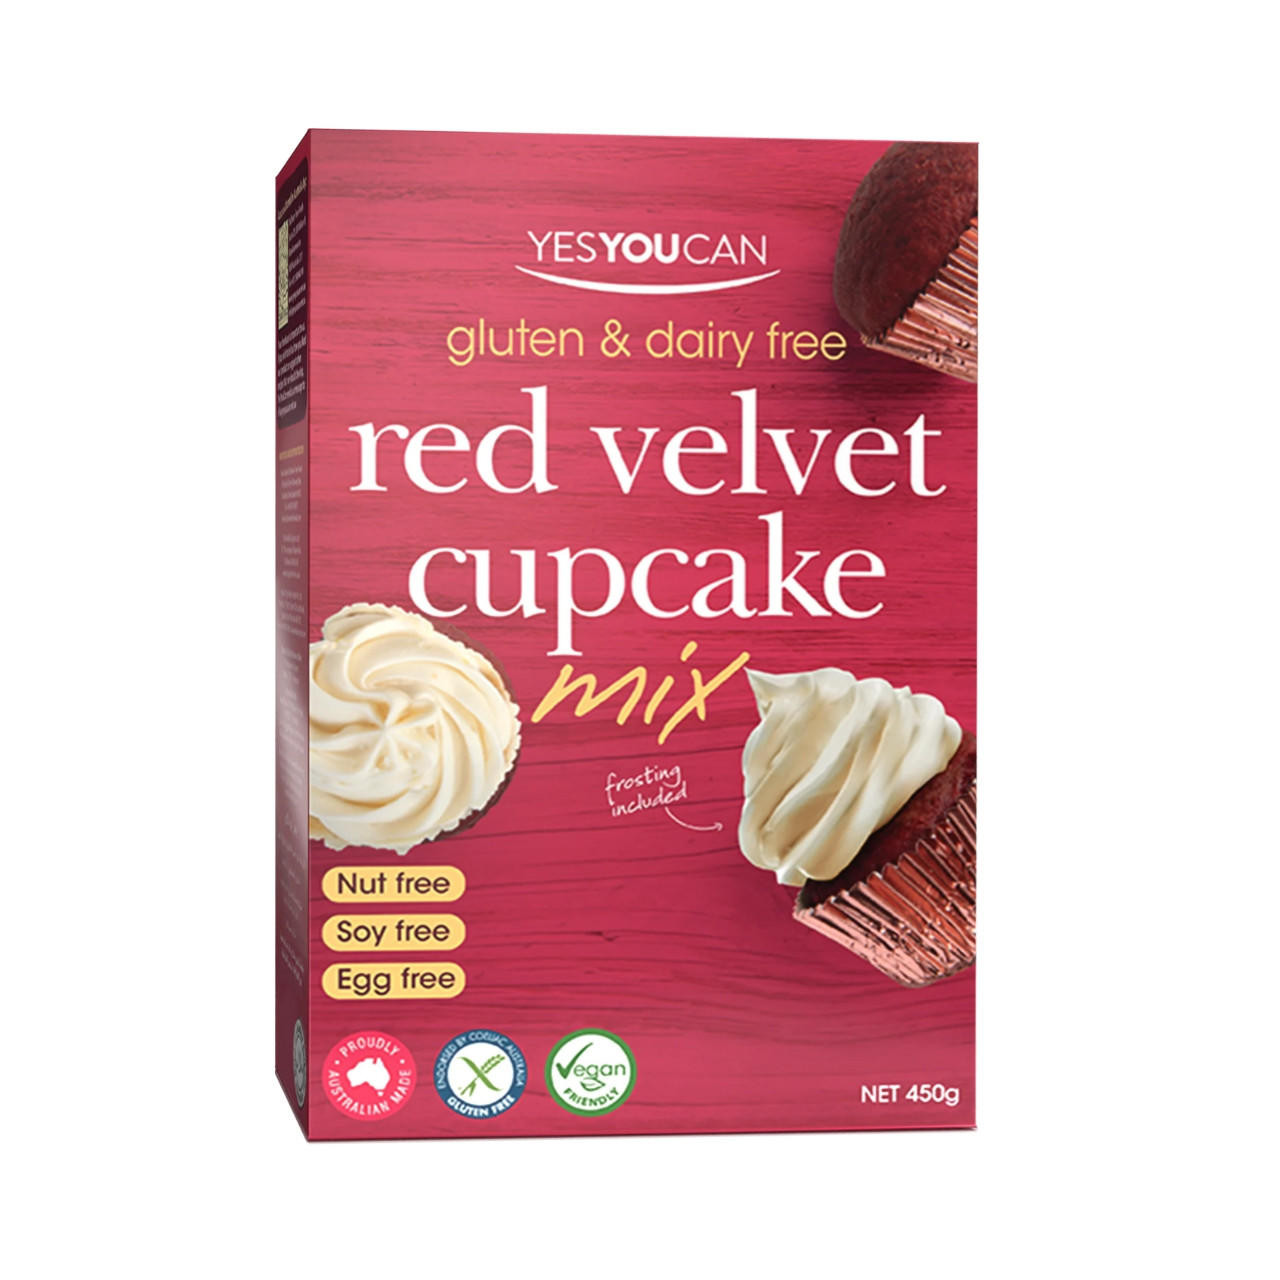  Yes You Can Red Velvet Cupcake Mix 450g 